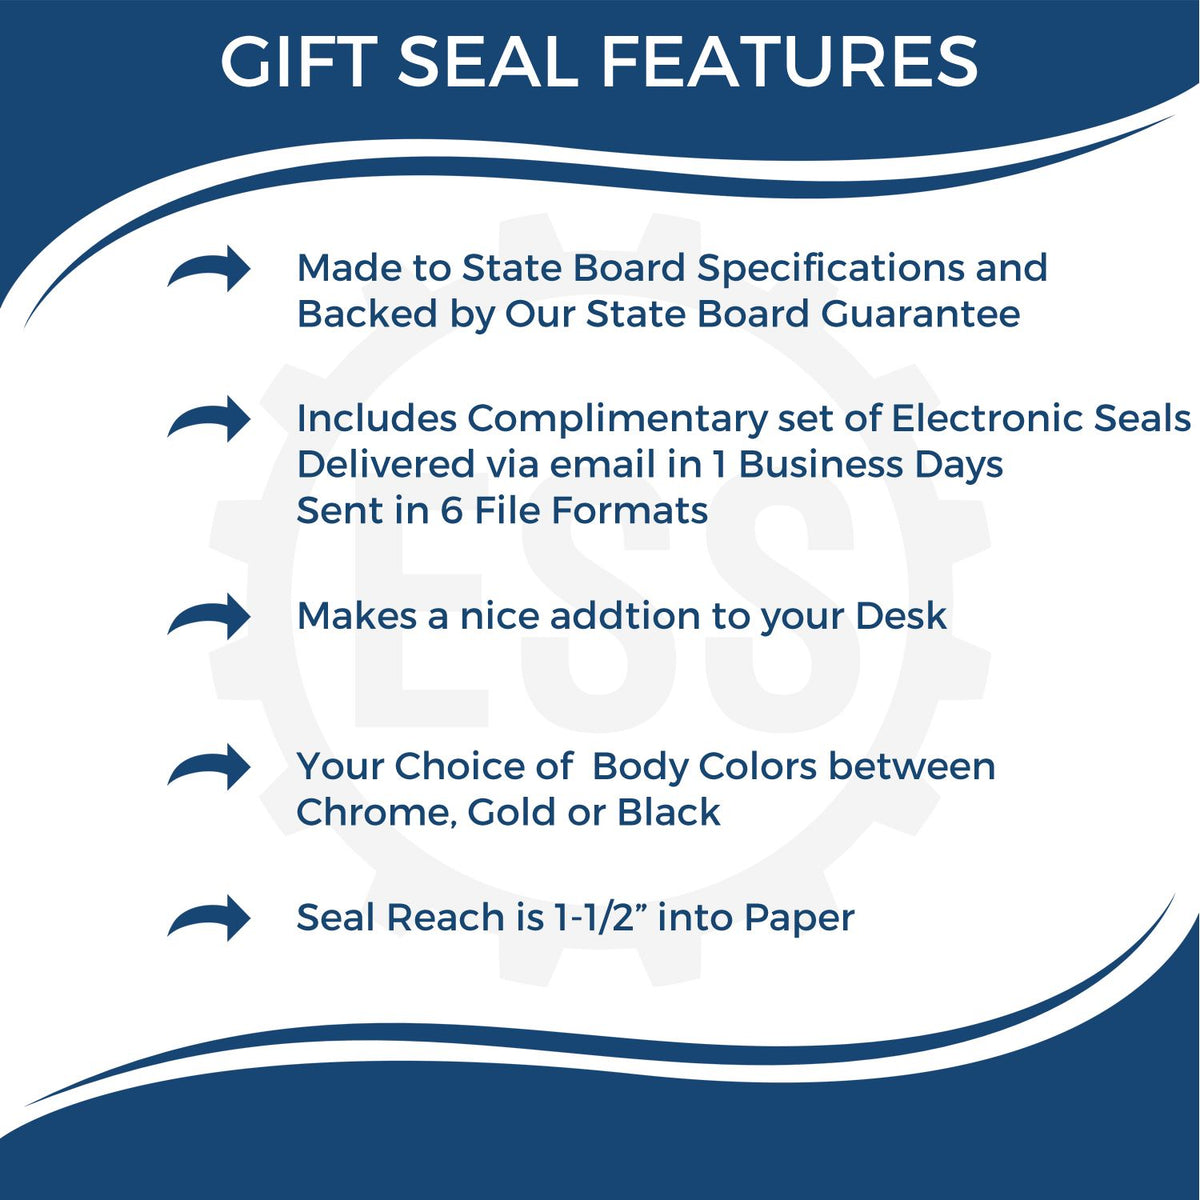 A picture of an infographic highlighting the selling points for the Gift Virginia Geologist Seal